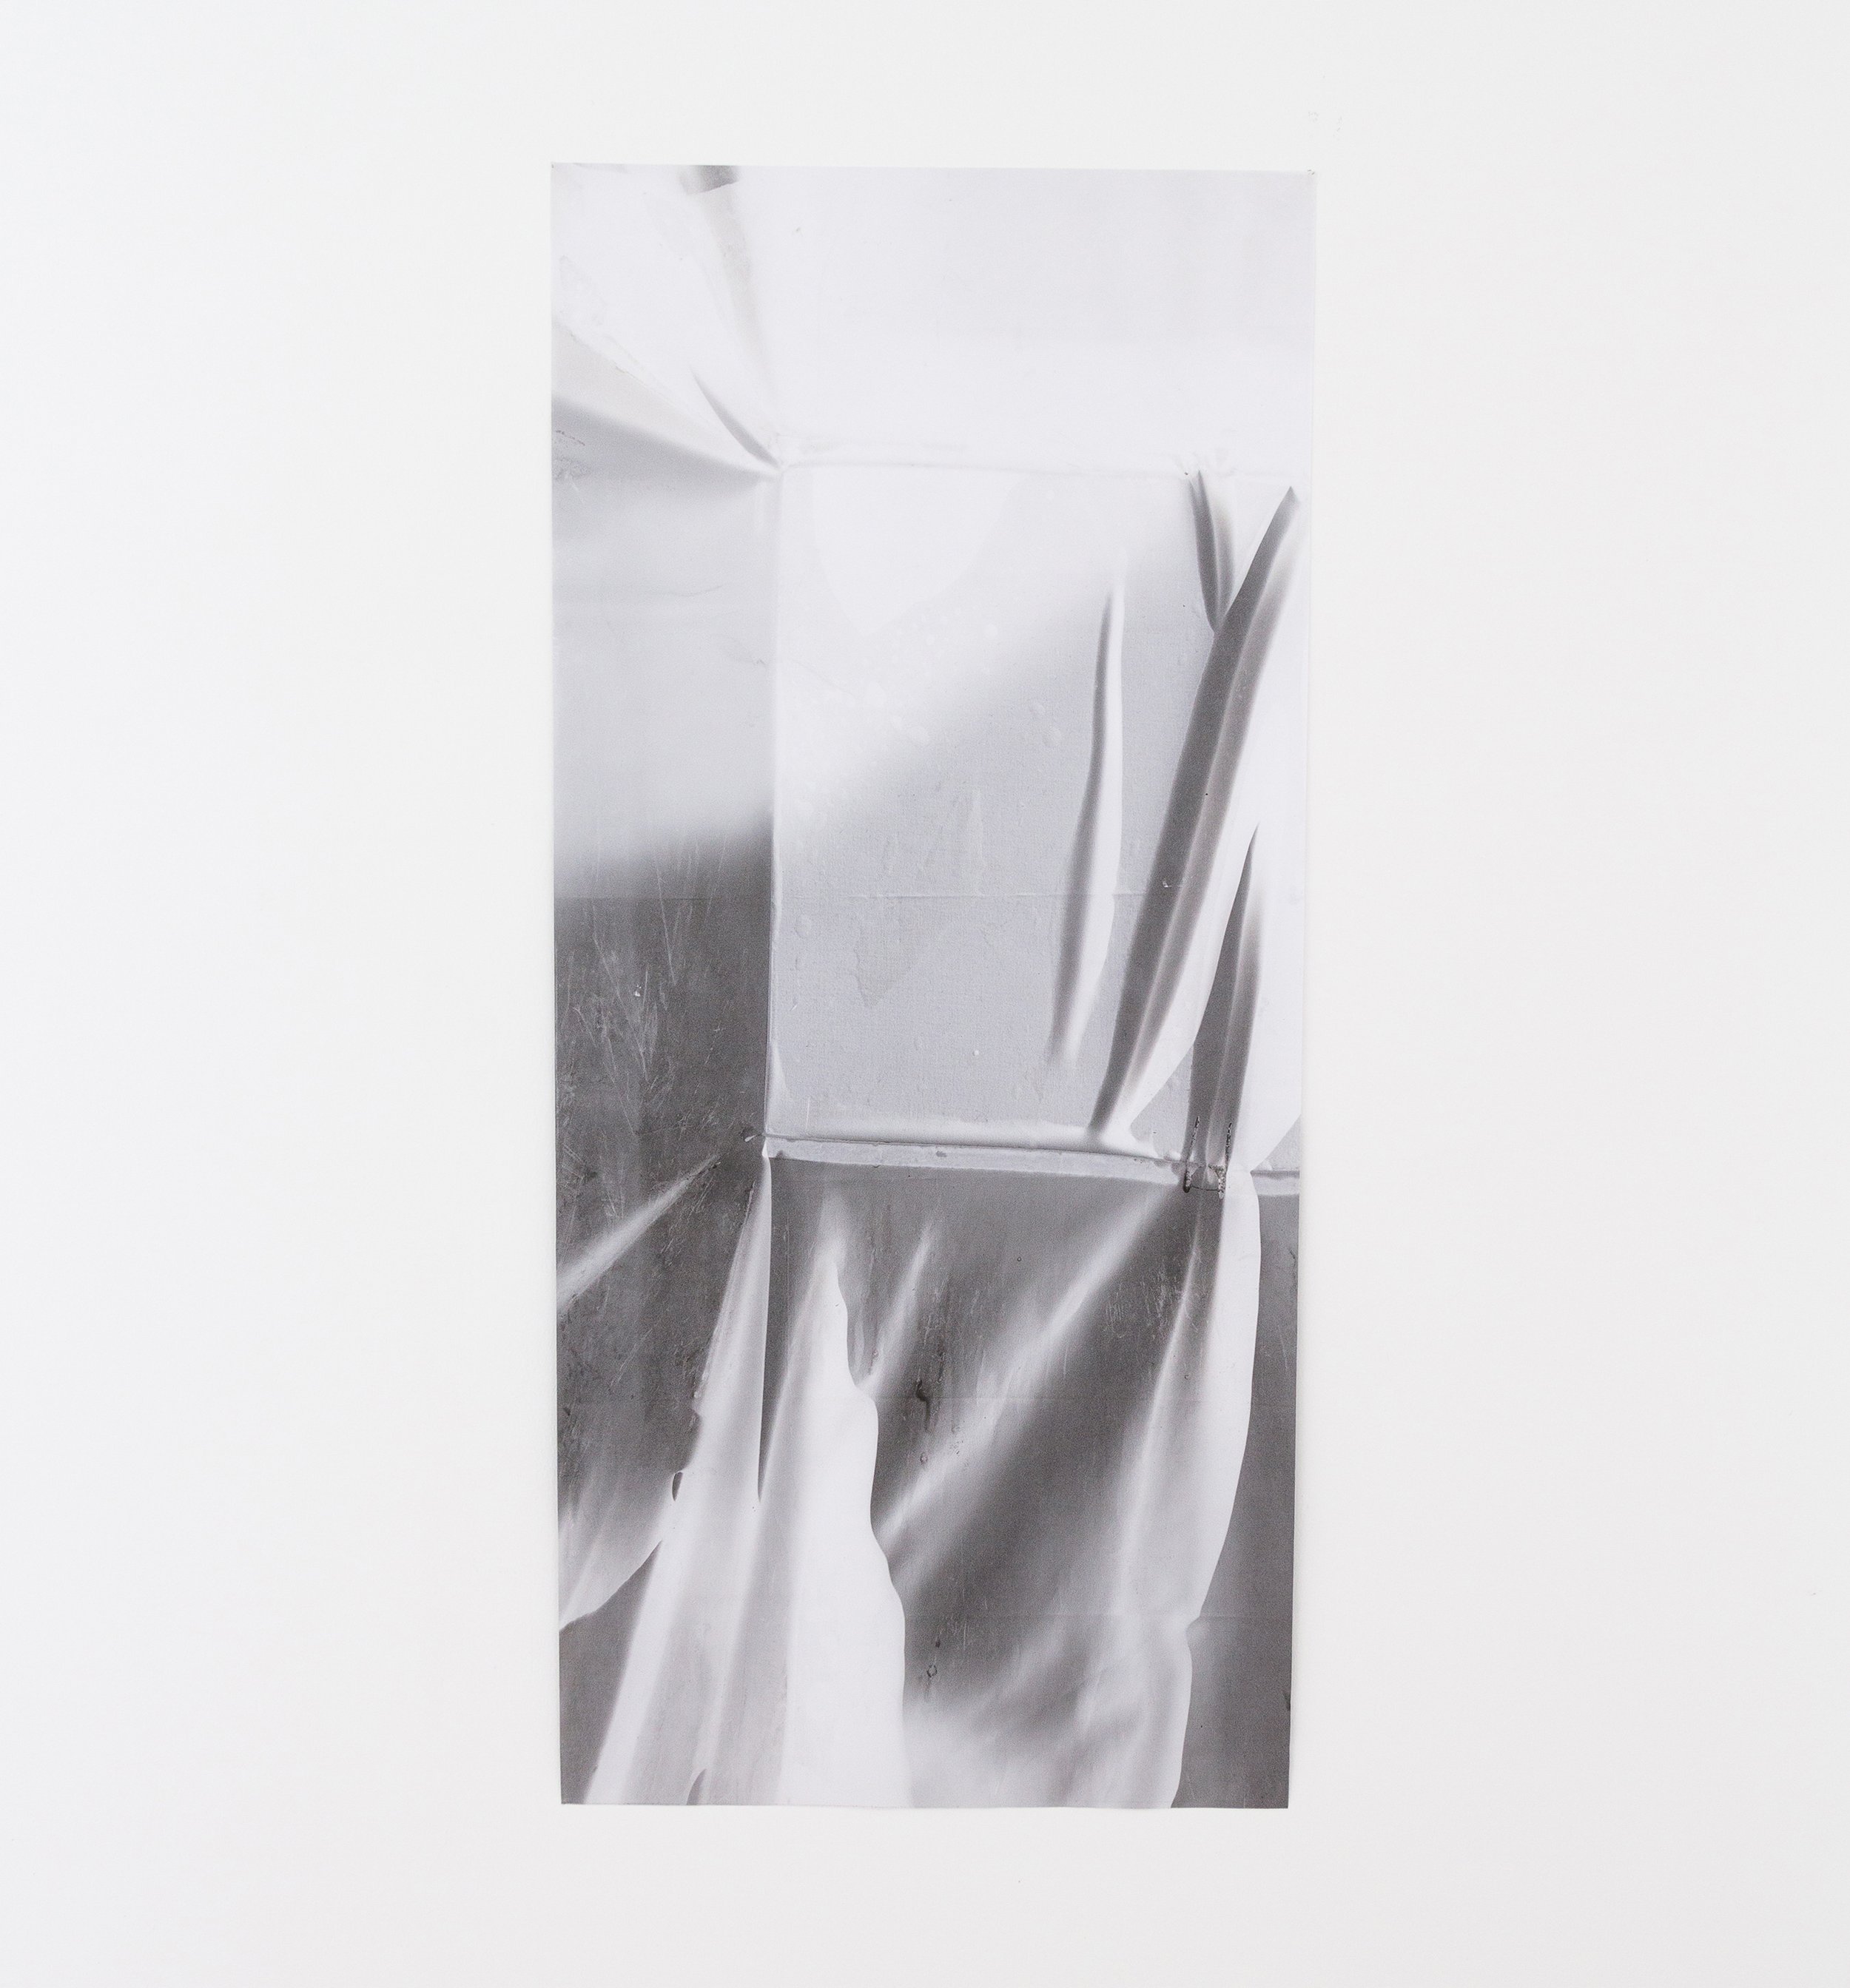  Martine Flor  Echoes From a Scene IlI , 2021 spatial photograms on polyester, text 59 x 27 inches (150 x 68 cm) MF3 